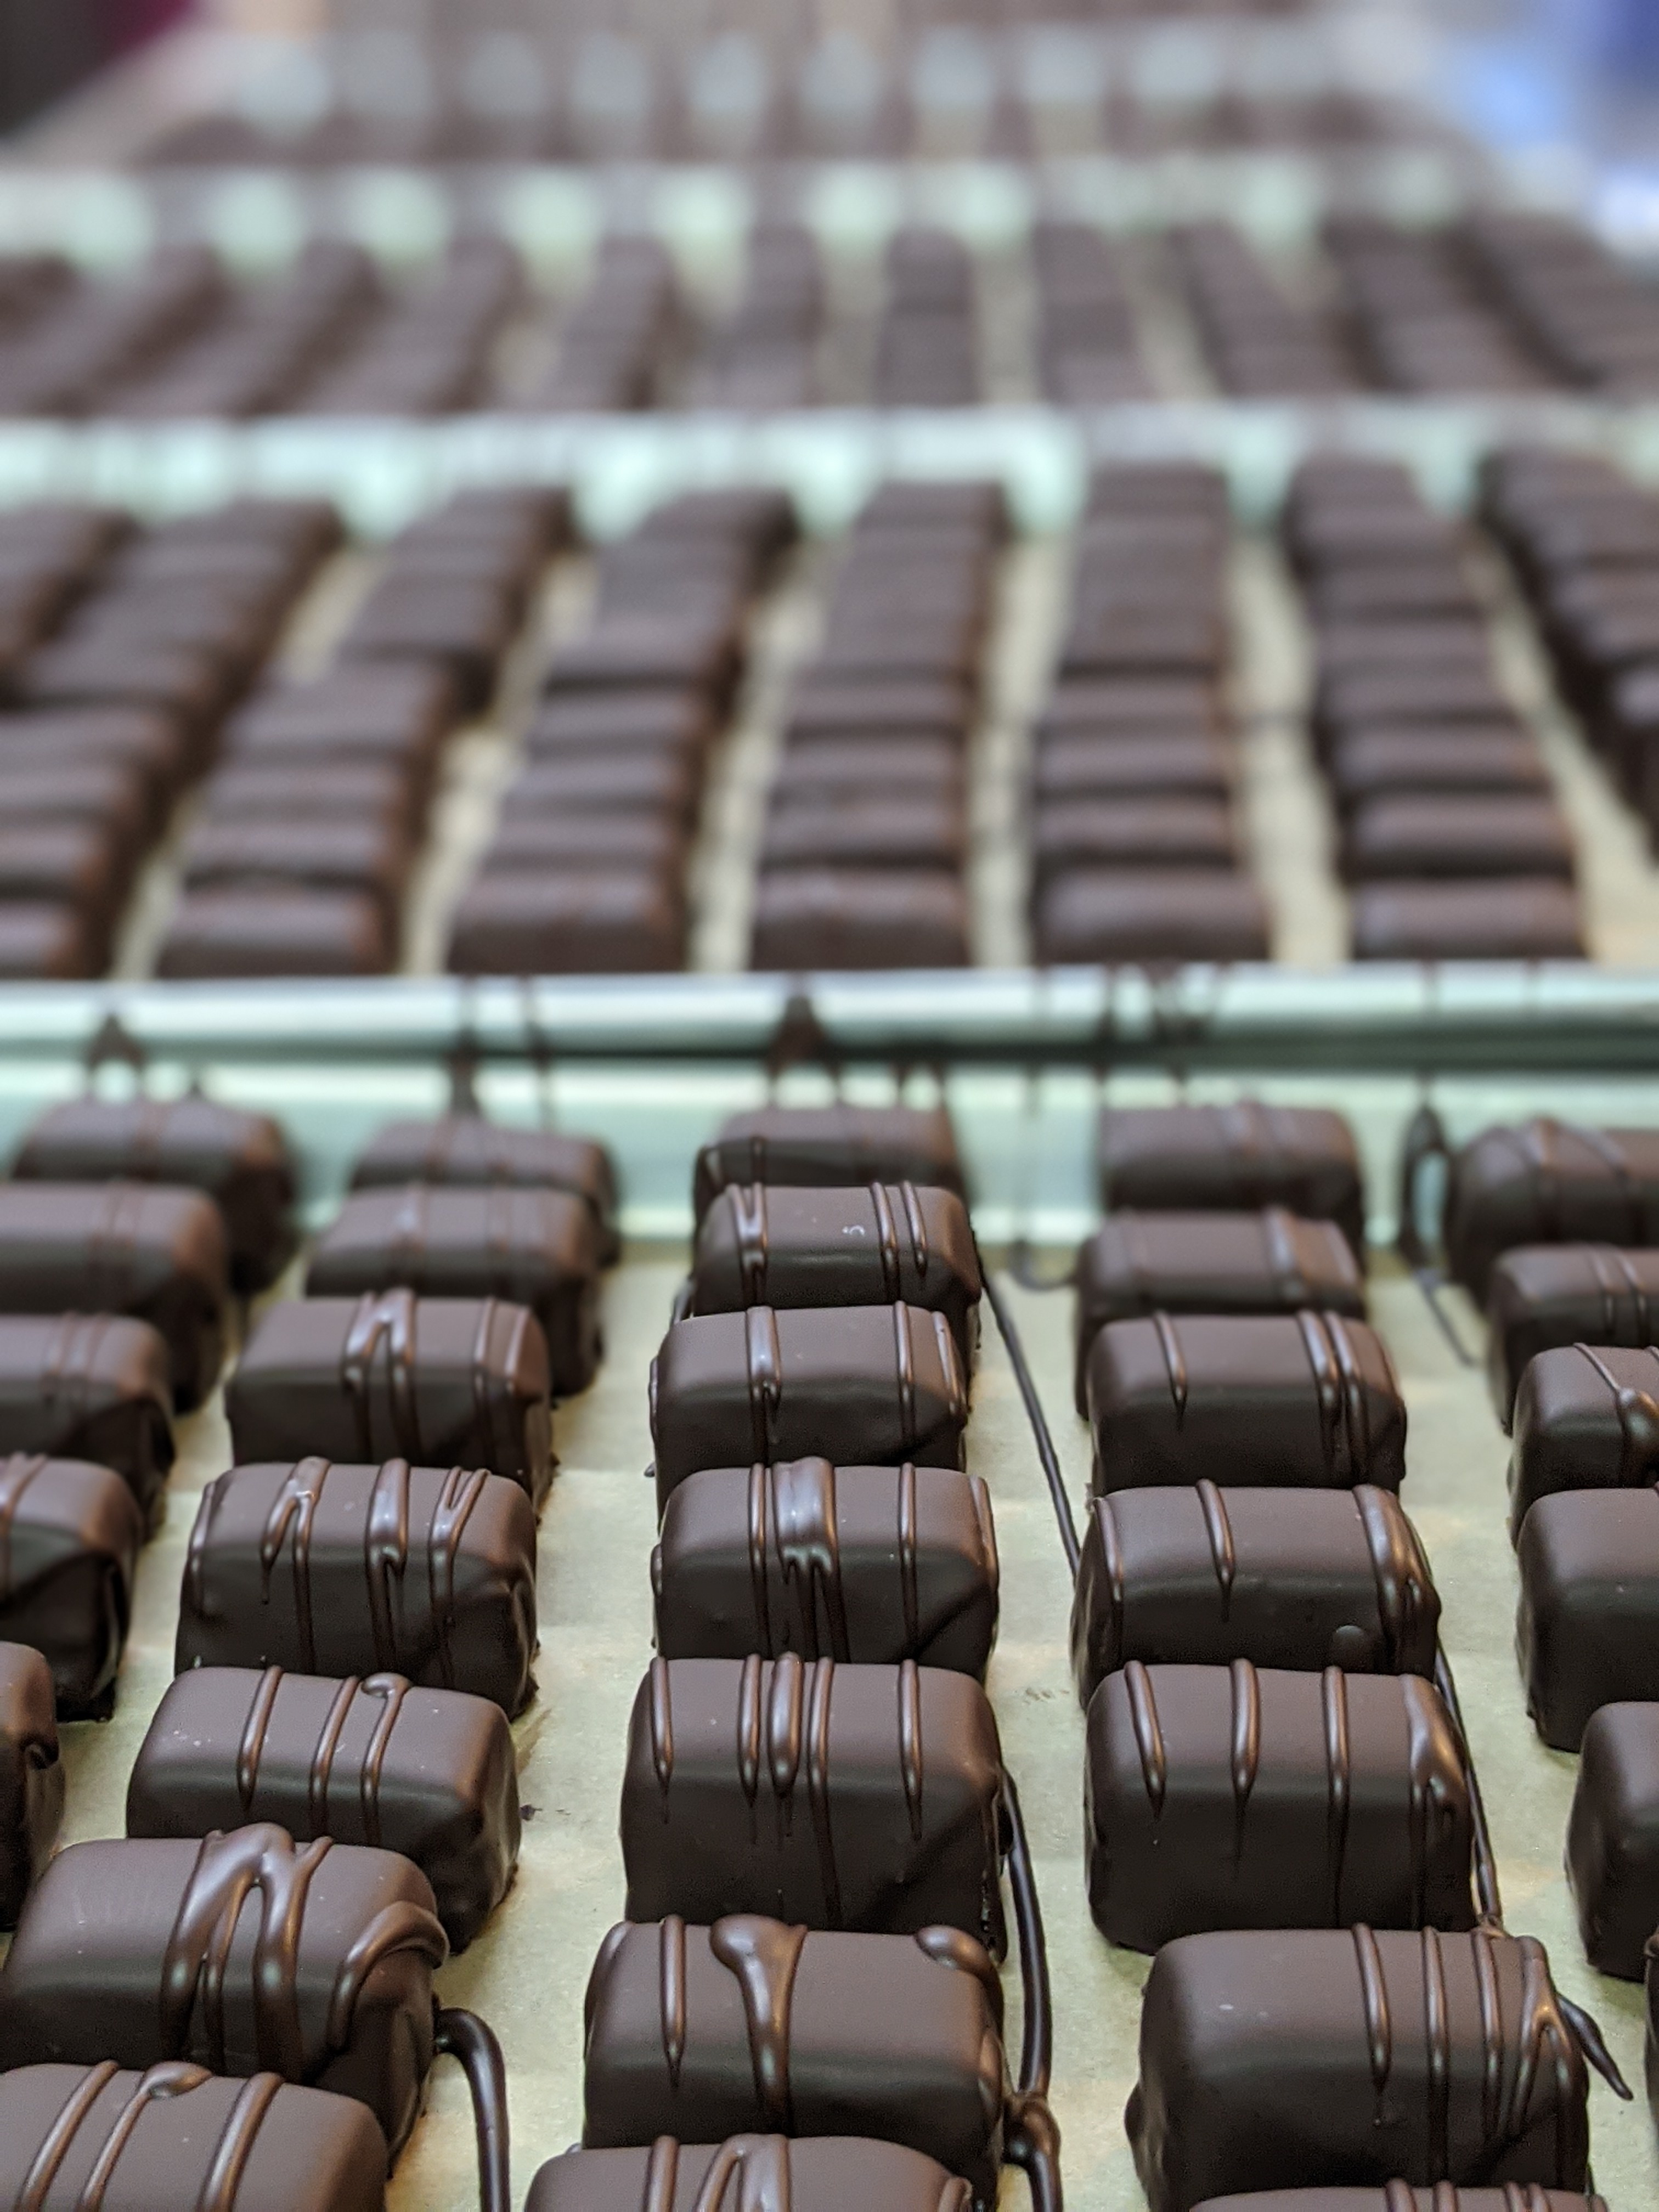 Multiple rows of chocolates on parchment paper in an assembly line.